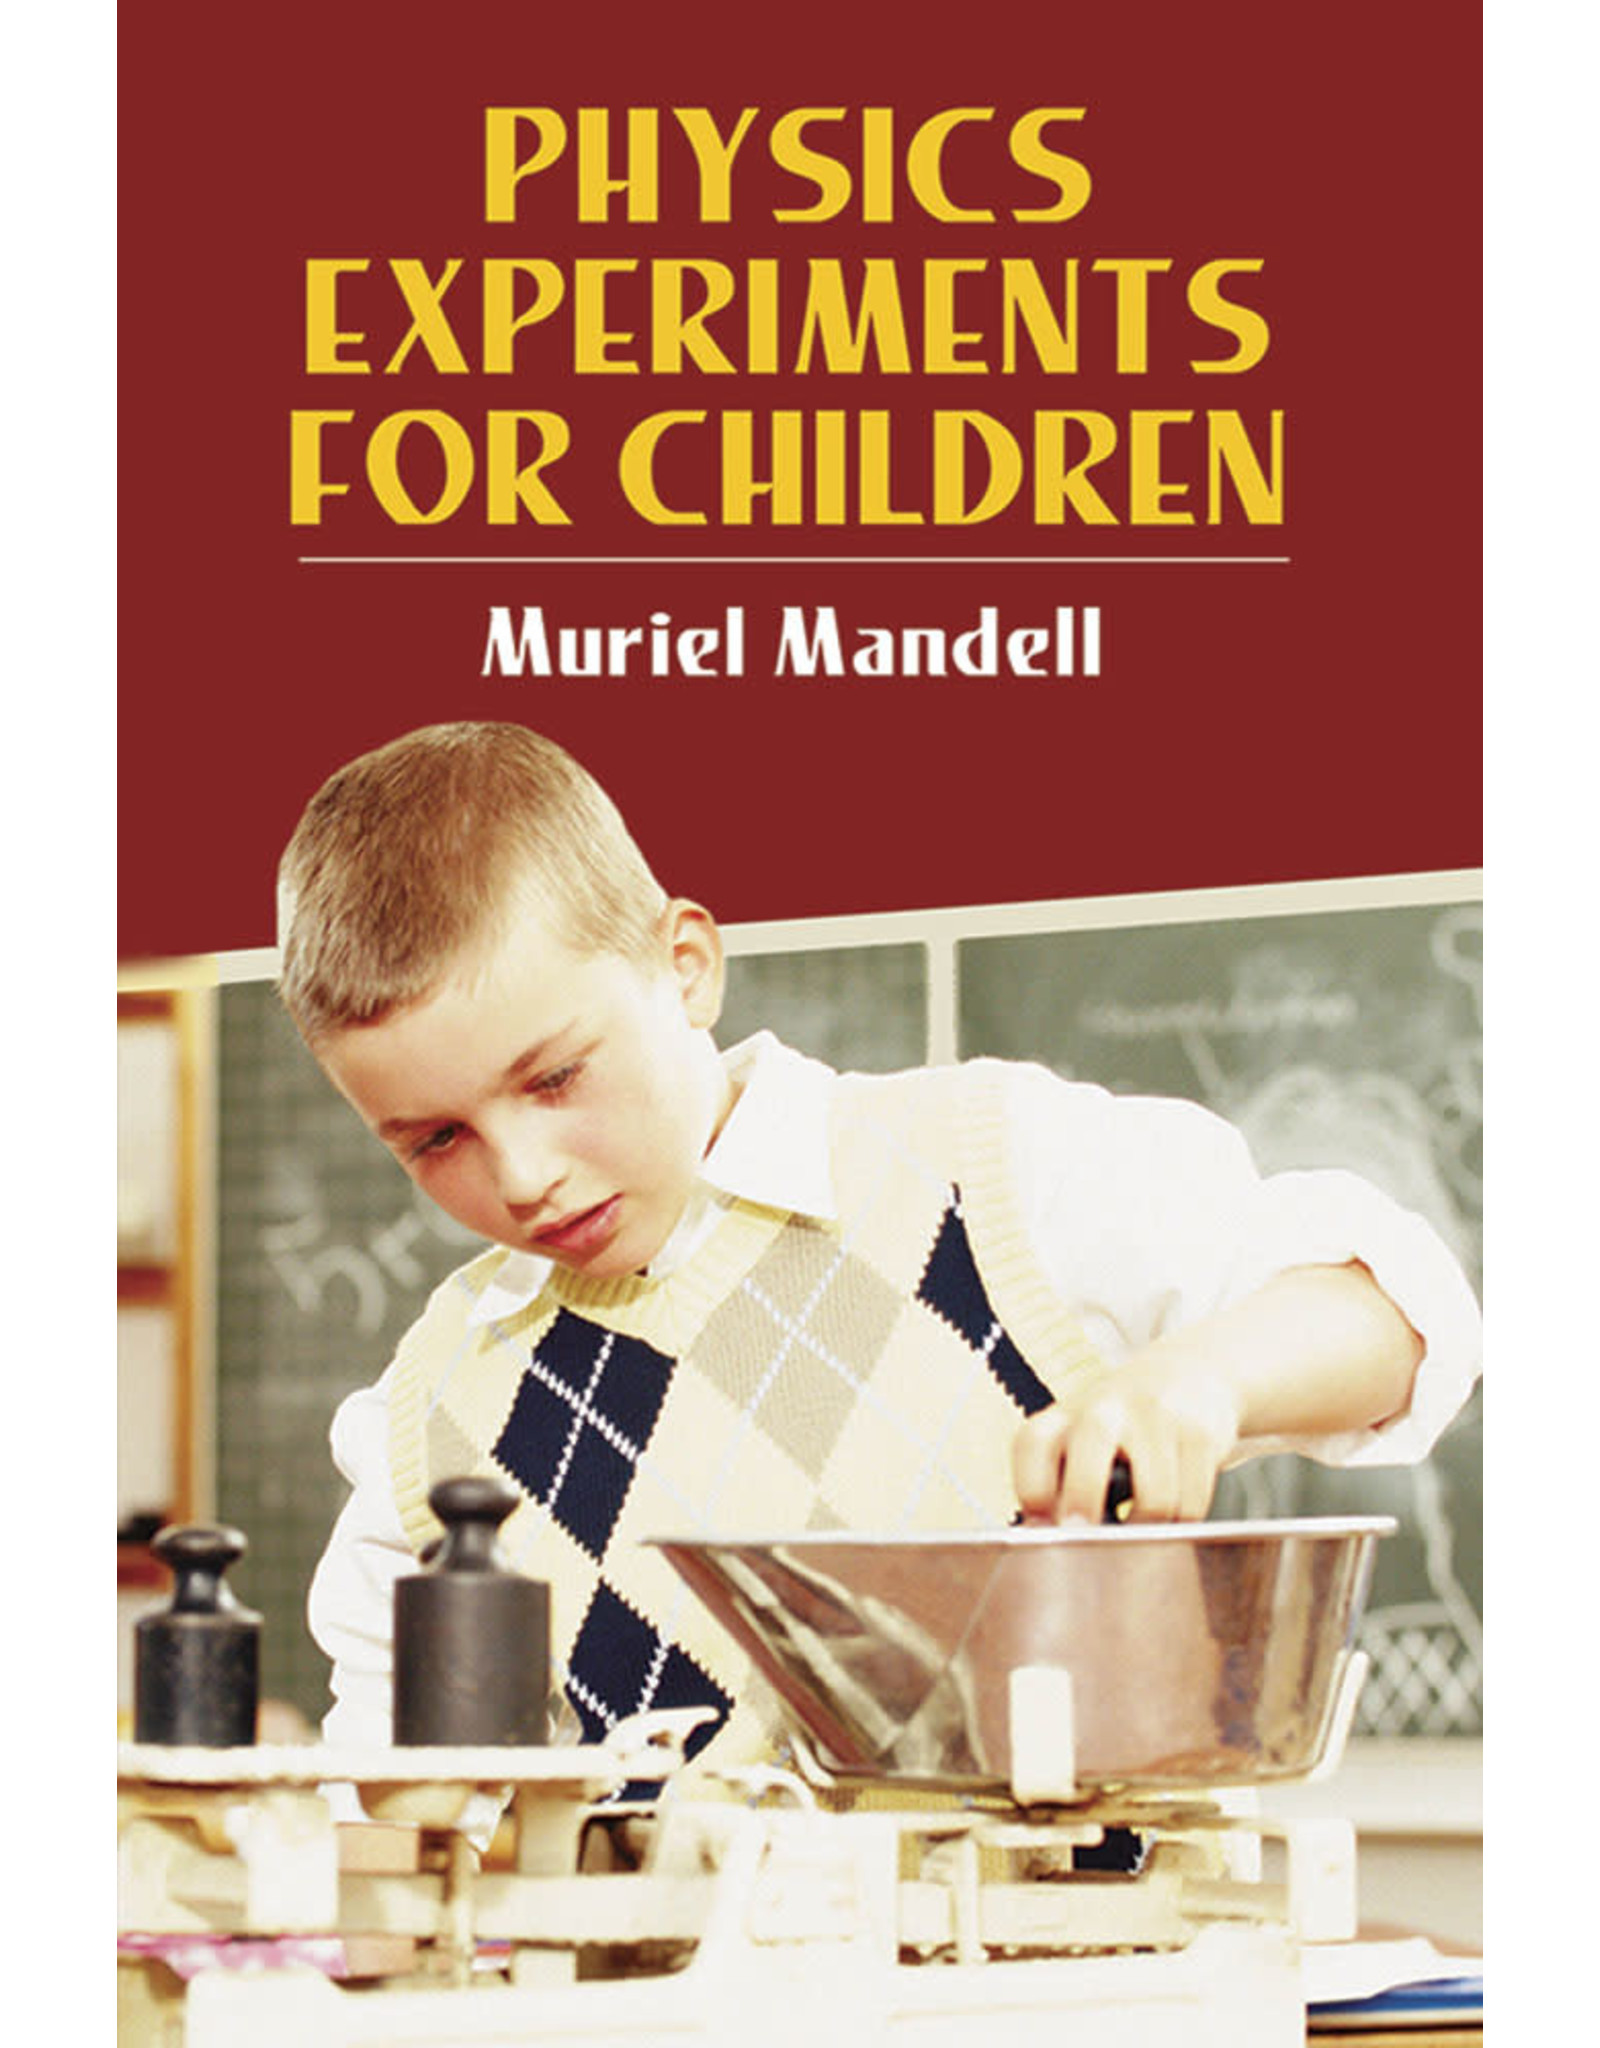 Physics Experiments for Children - Muriel Mandell